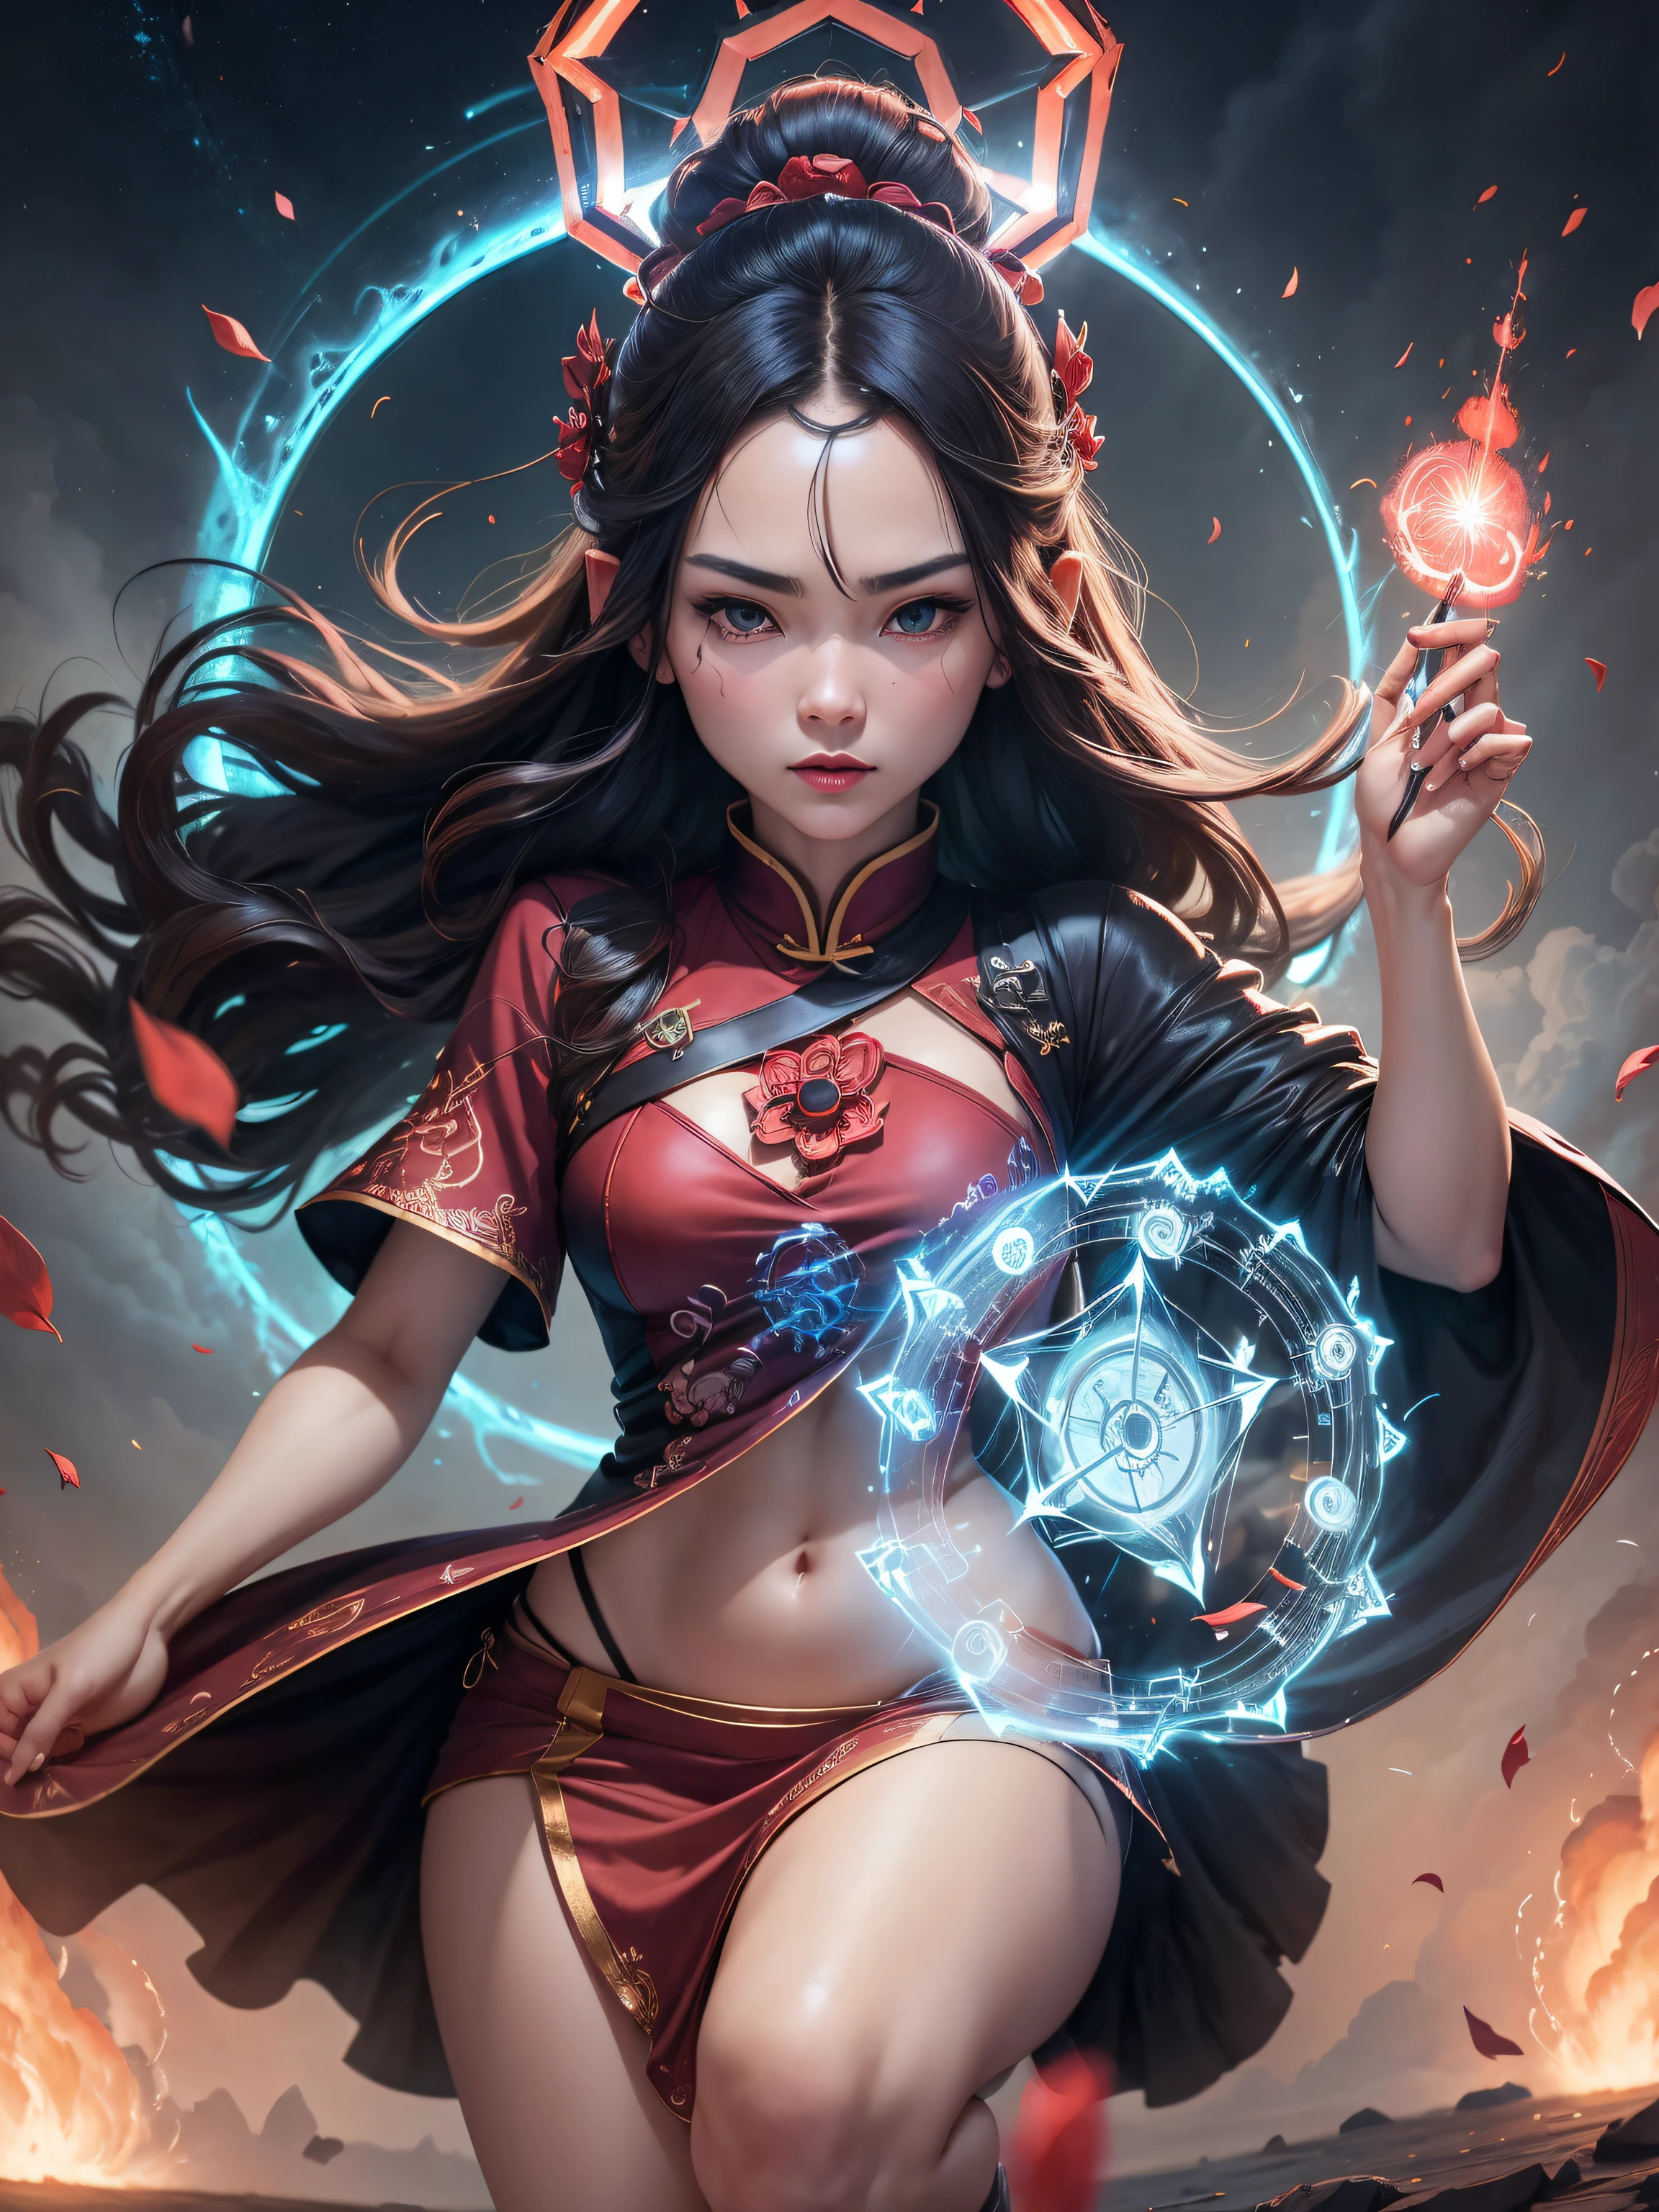 [(White background:1.5)::5] hexagon,(face detailed:1.2),sorrido,Chinese style,immortal behavior, long haired woman, peaks, deep ravines, stele, turbulent winds, flying dragons, cross-shaped sword, purple clouds, giant birds, portal, smoke billowing, flames, mystical runes, Ancient Cloak, red petals, Halation,lightnings,thunders,